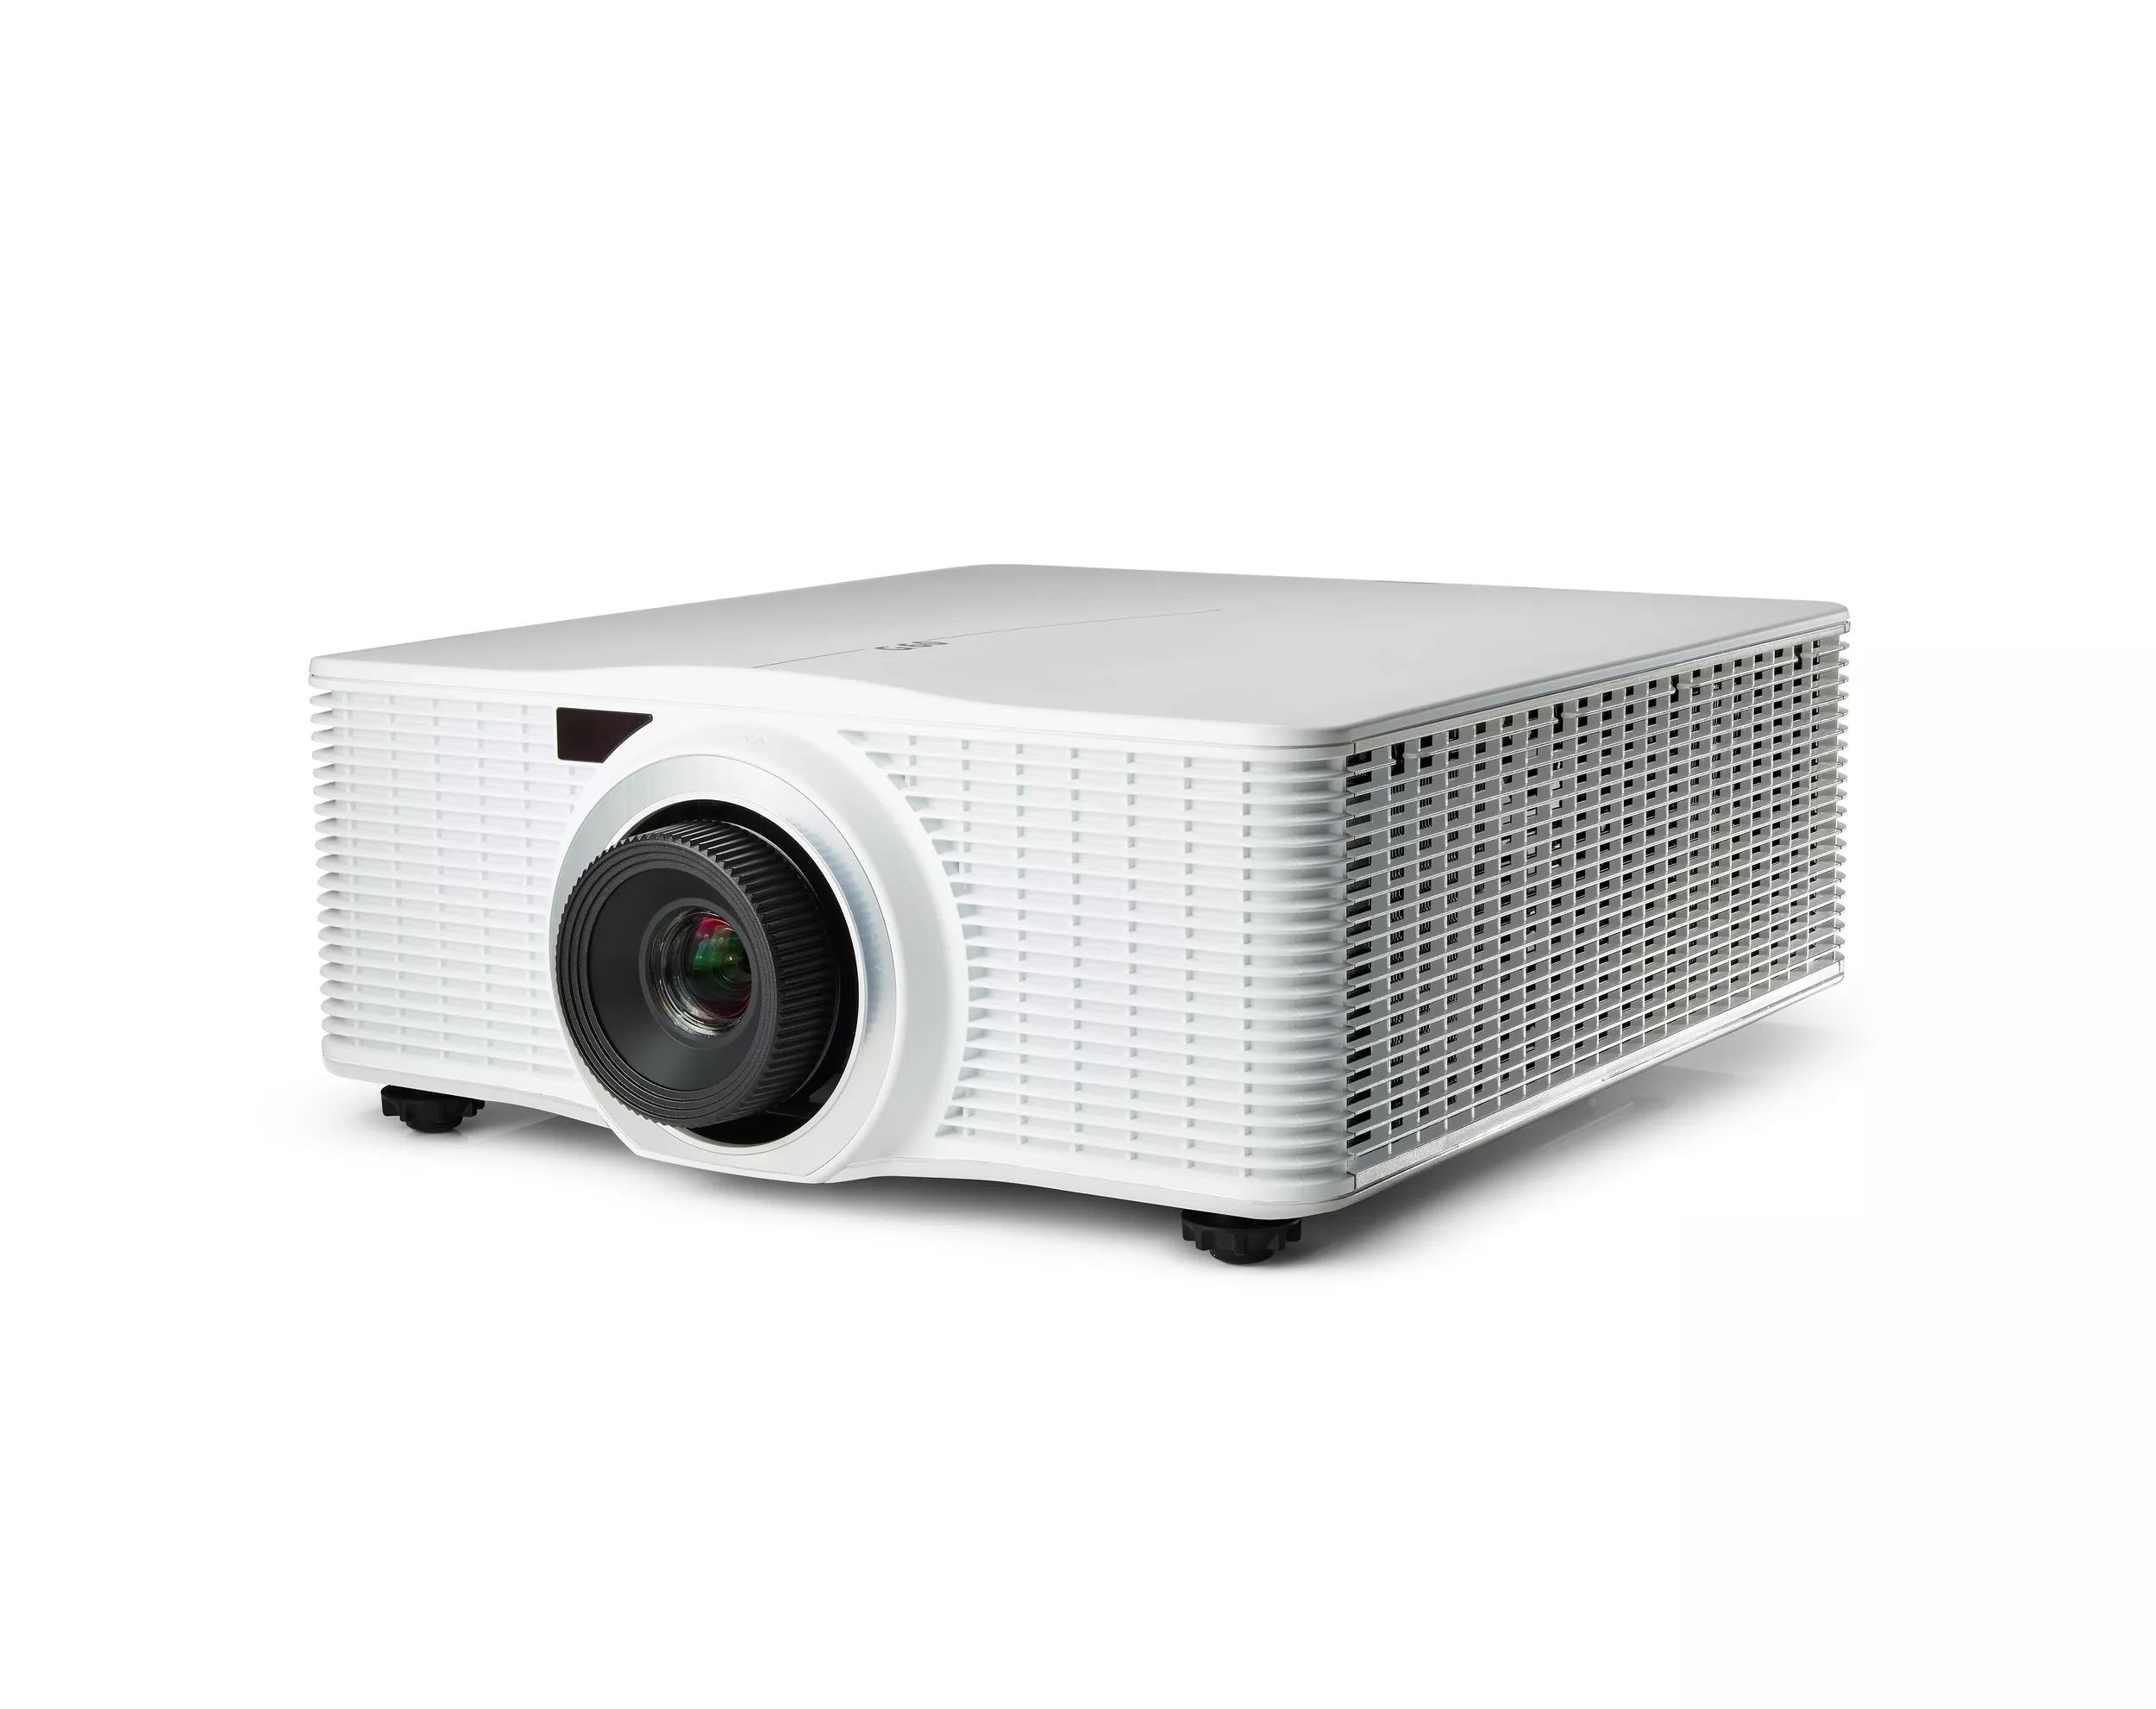 G62 projector (white version)